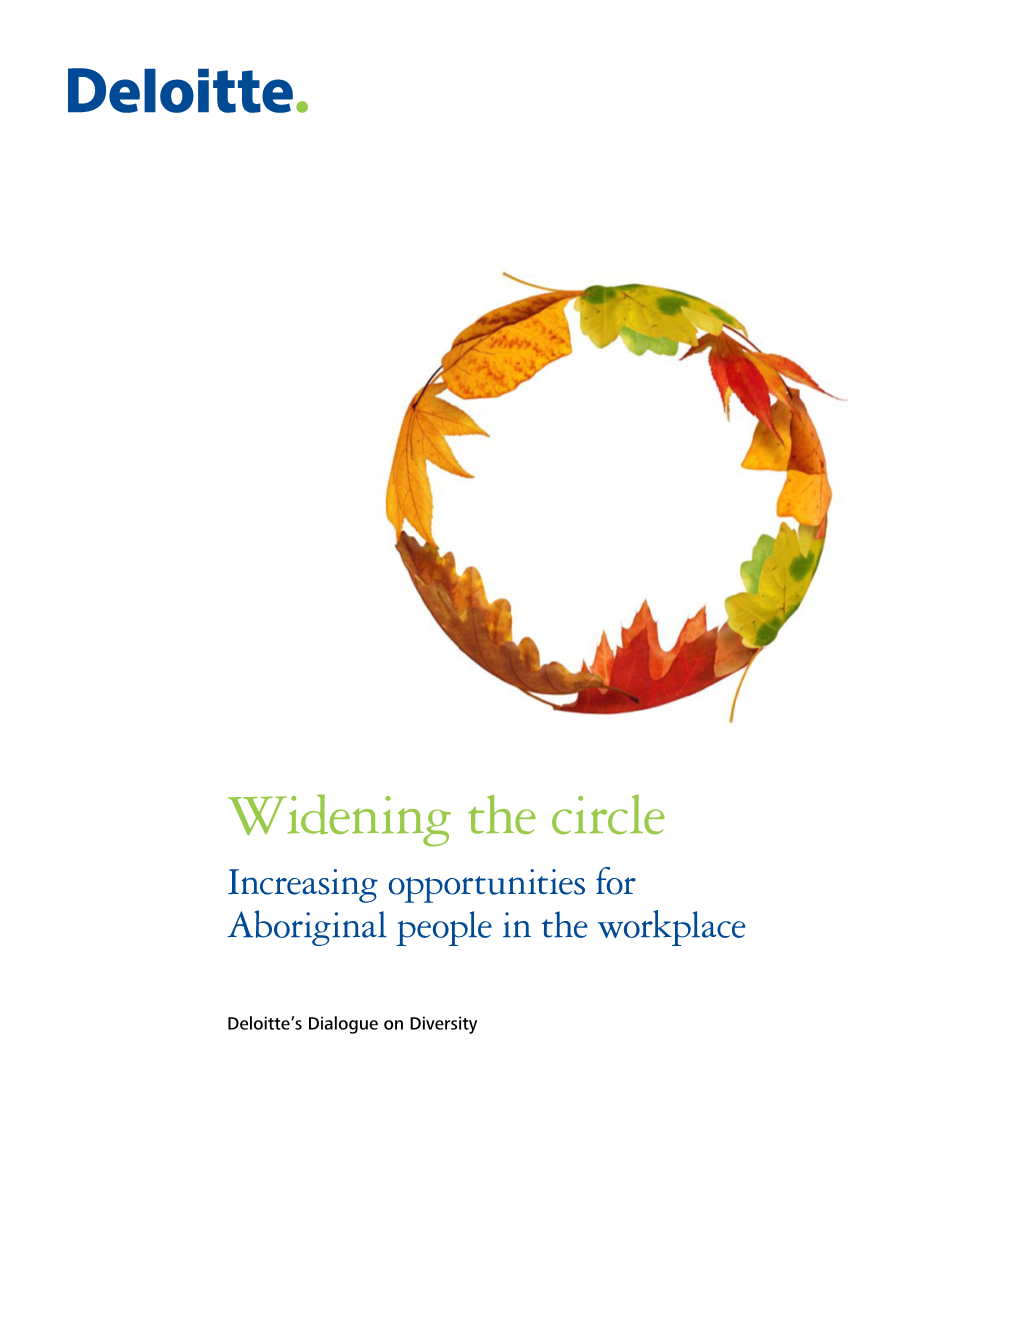 Widening the Circle Increasing Opportunities for Aboriginal People in the Workplace